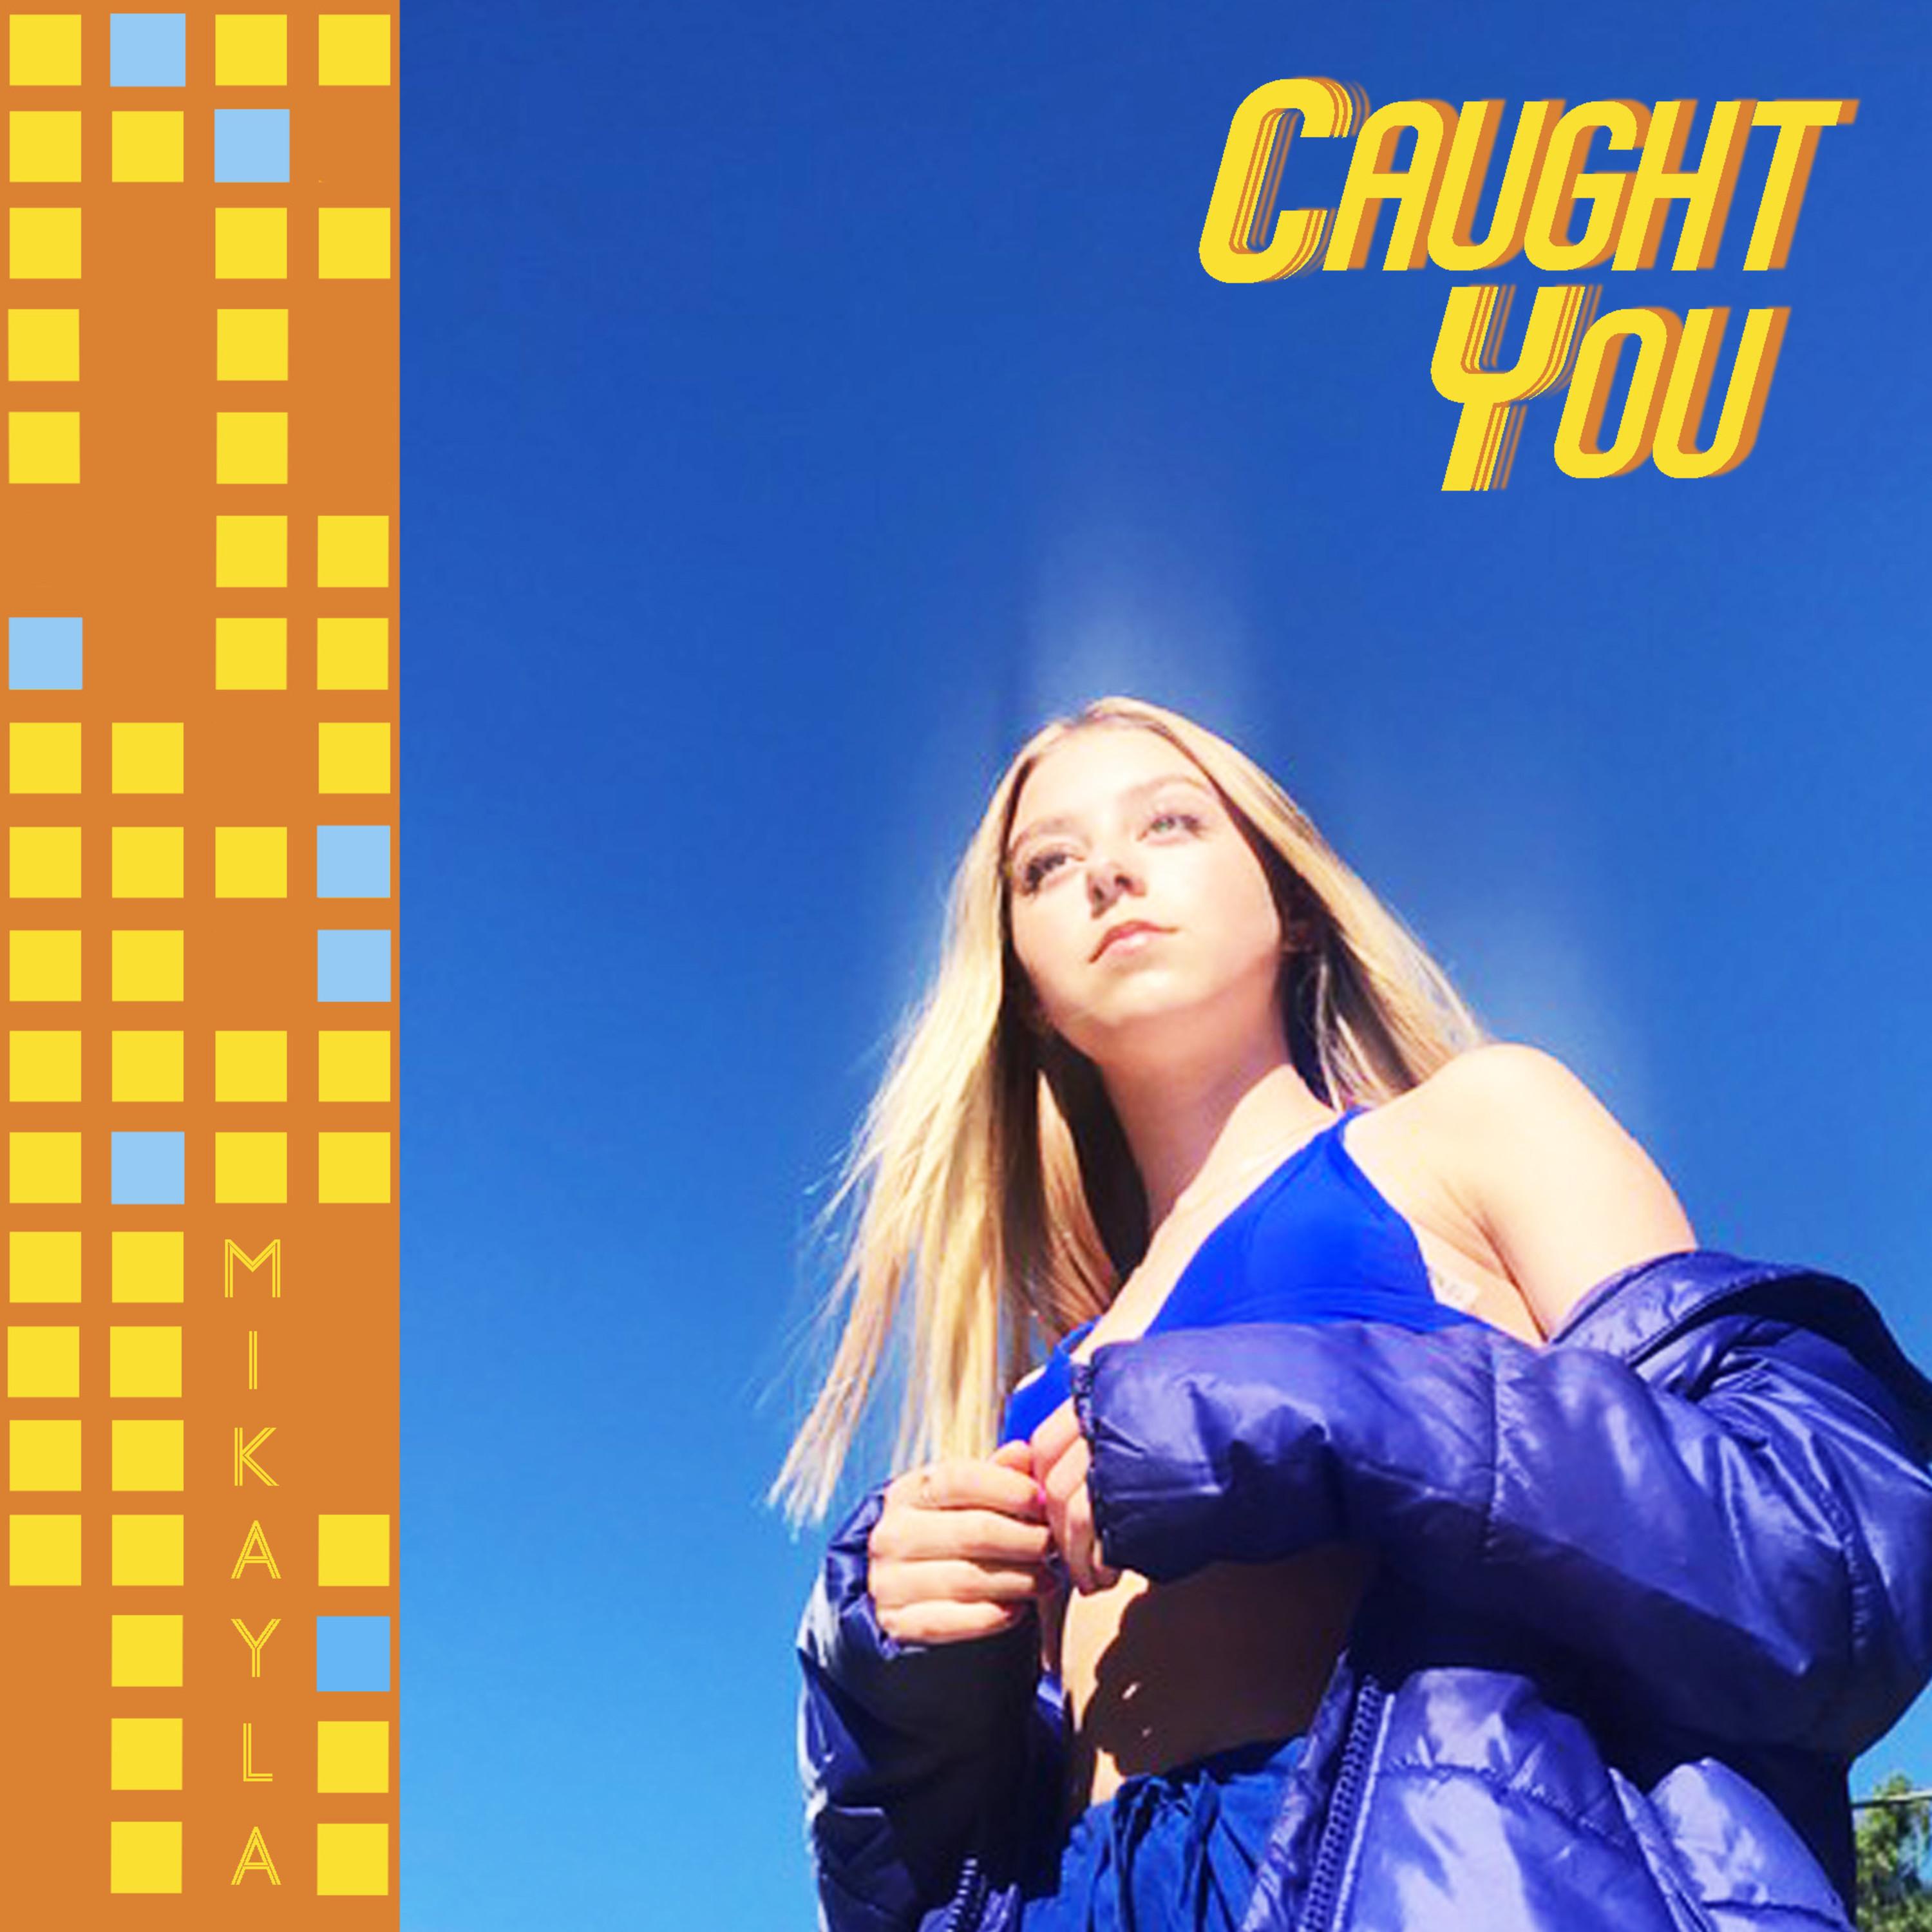 Mikayla - Caught You